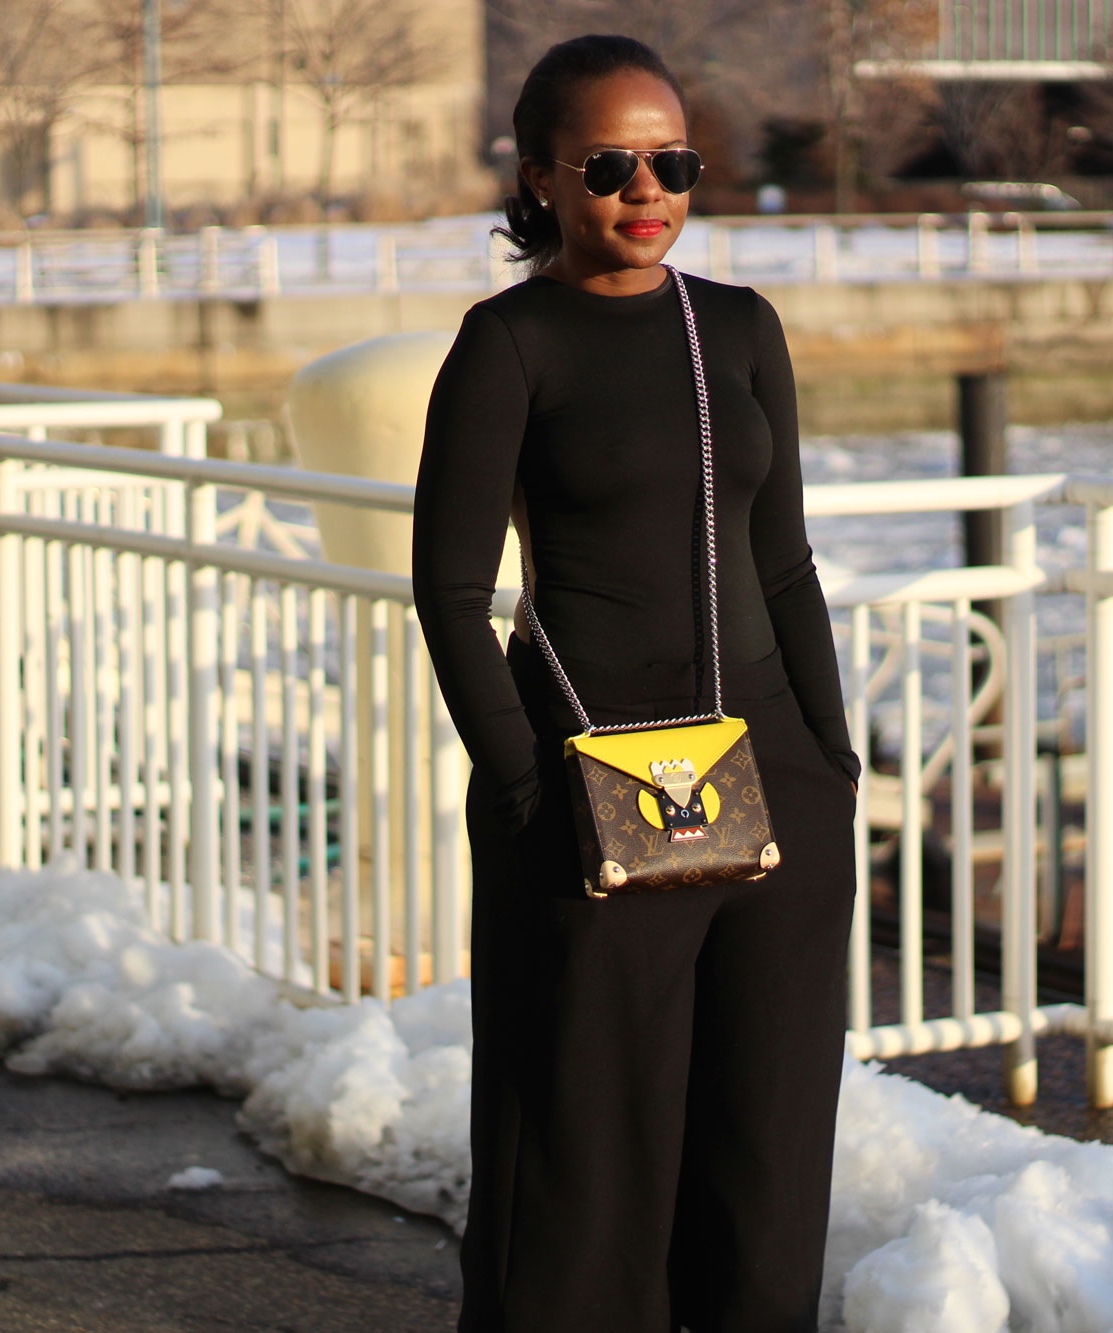 Wolford Image String Bodysuit and Black ASOS Culottes and Yellow Louis Vuitton Louis Vuitton Mask Bag